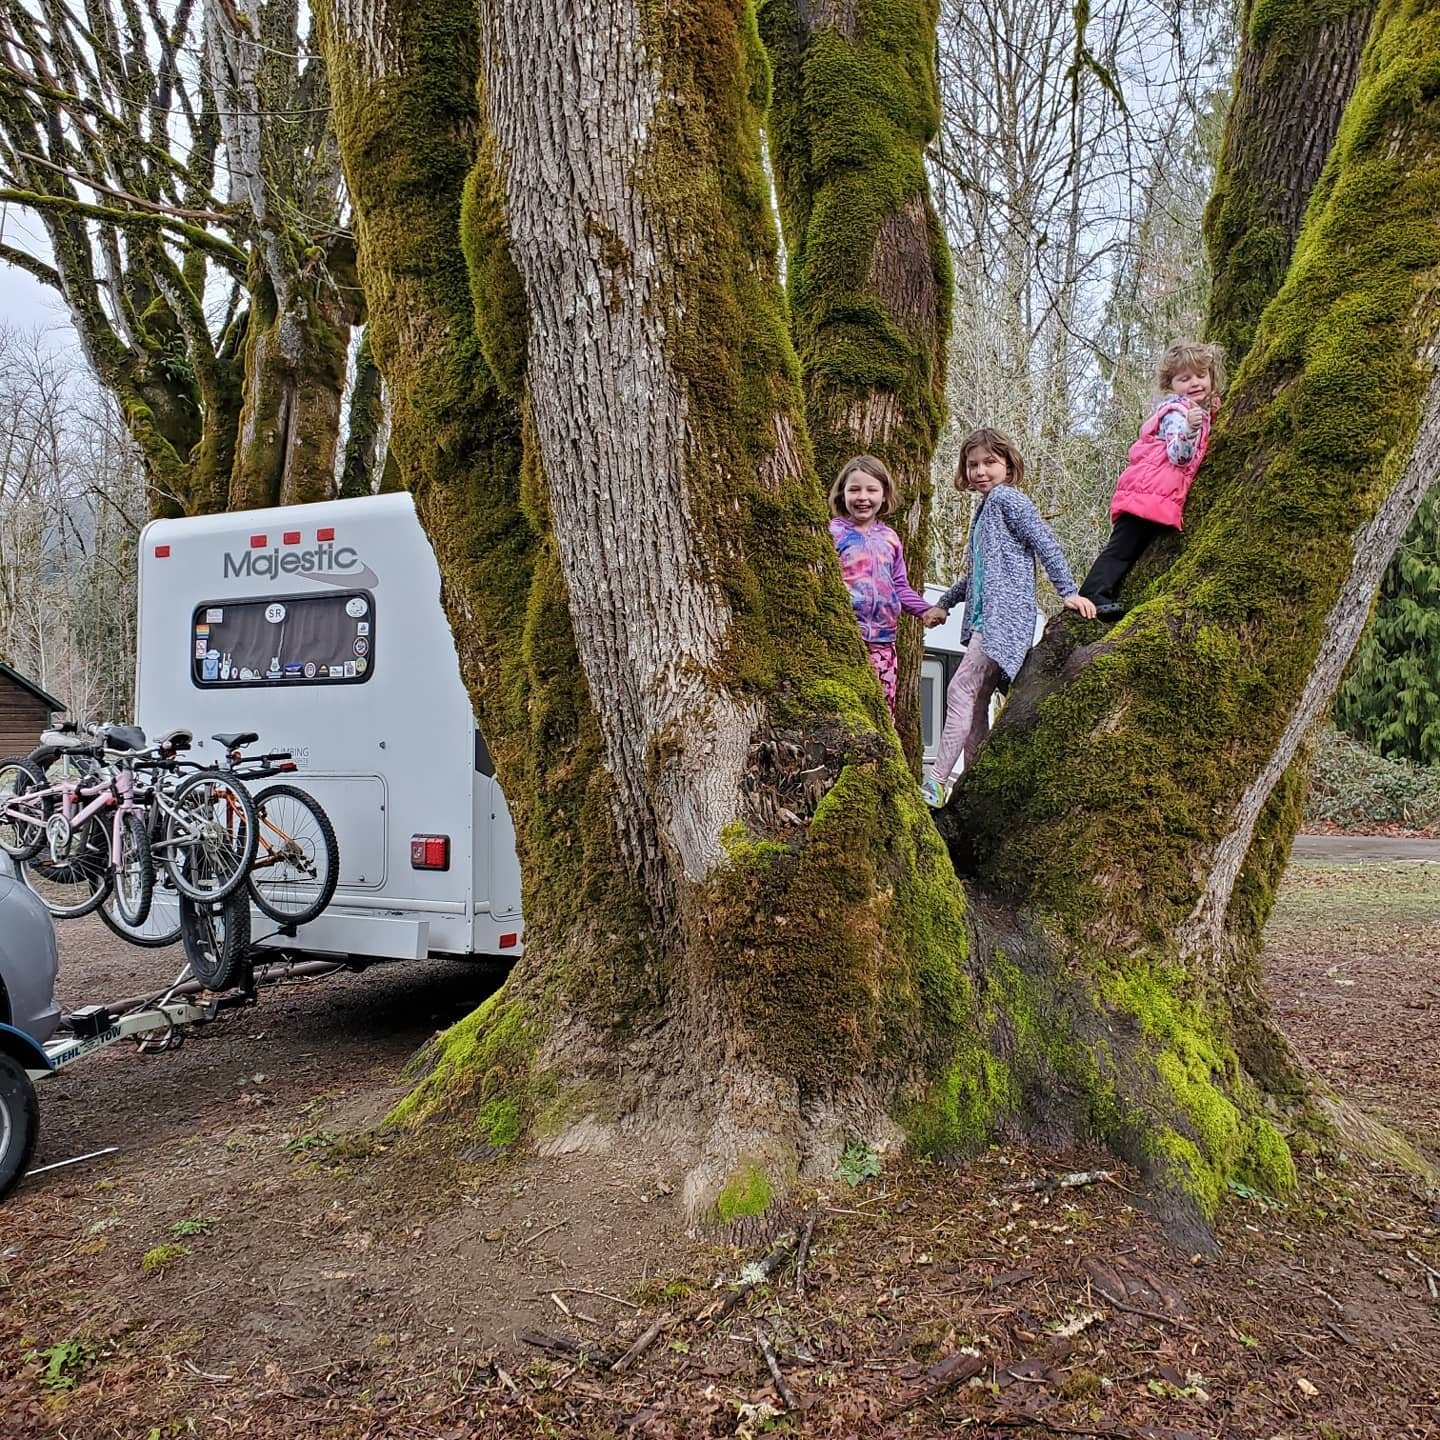 These little road warriors finally got to play at their new home basecamp today after 2,800 miles. 
Stoke was high!